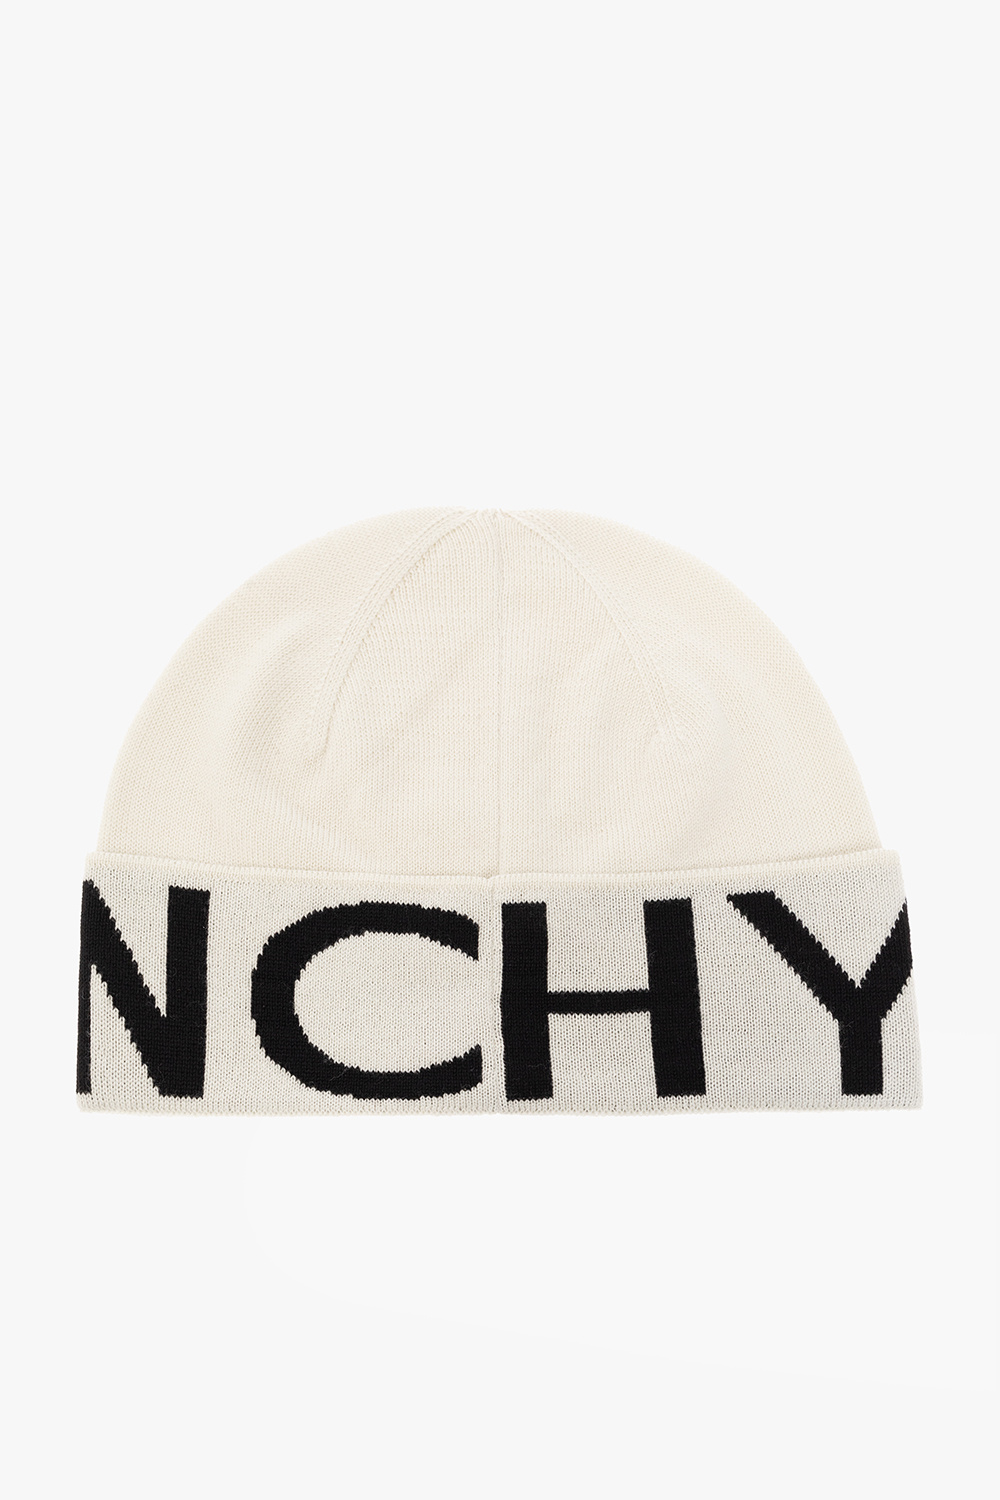 givenchy tester Beanie with logo